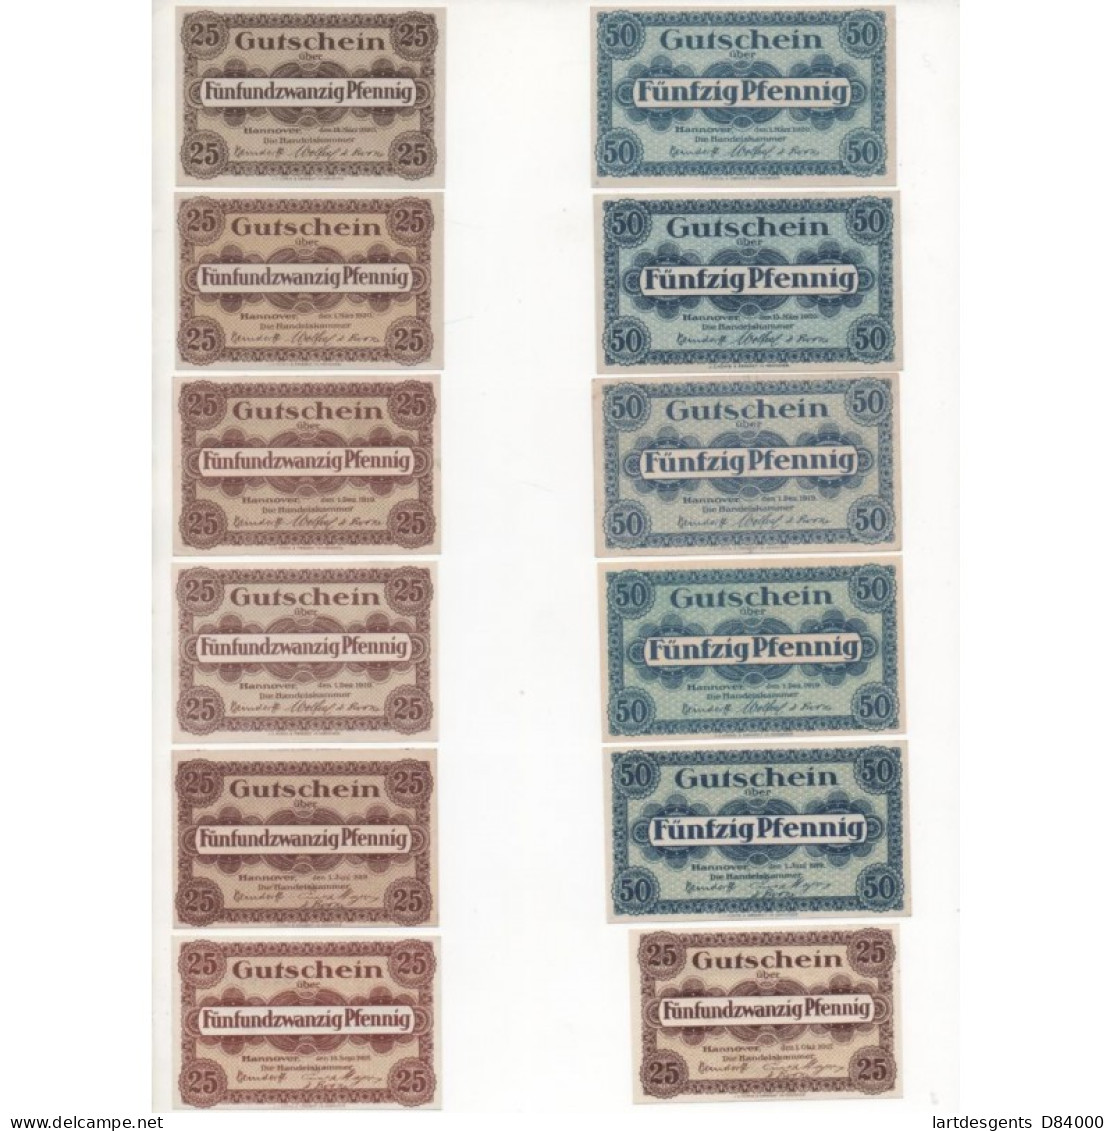 NOTGELD - HANNOVER - 22 Different Notes - 1917-1920 (H035) - [11] Local Banknote Issues